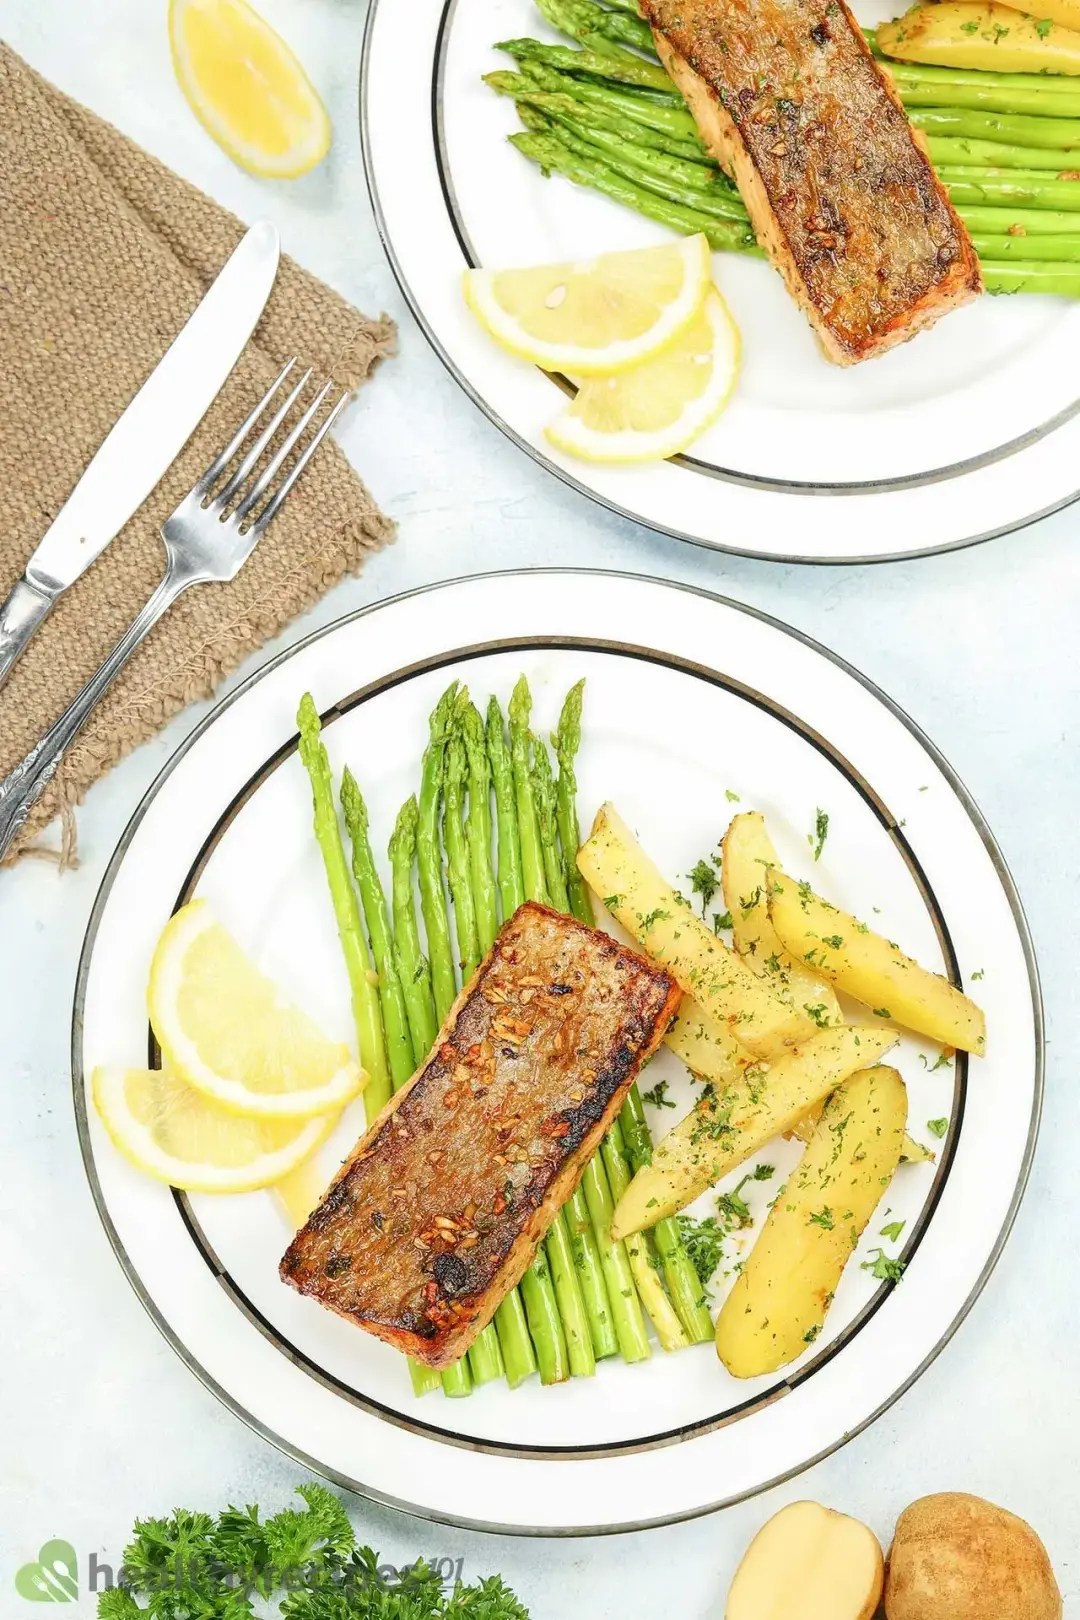 A flatlay of a dinner knife, a fork, and two plates containing a cooked salmon fillet, potato wedges, asparagus stalks, and lemon slices